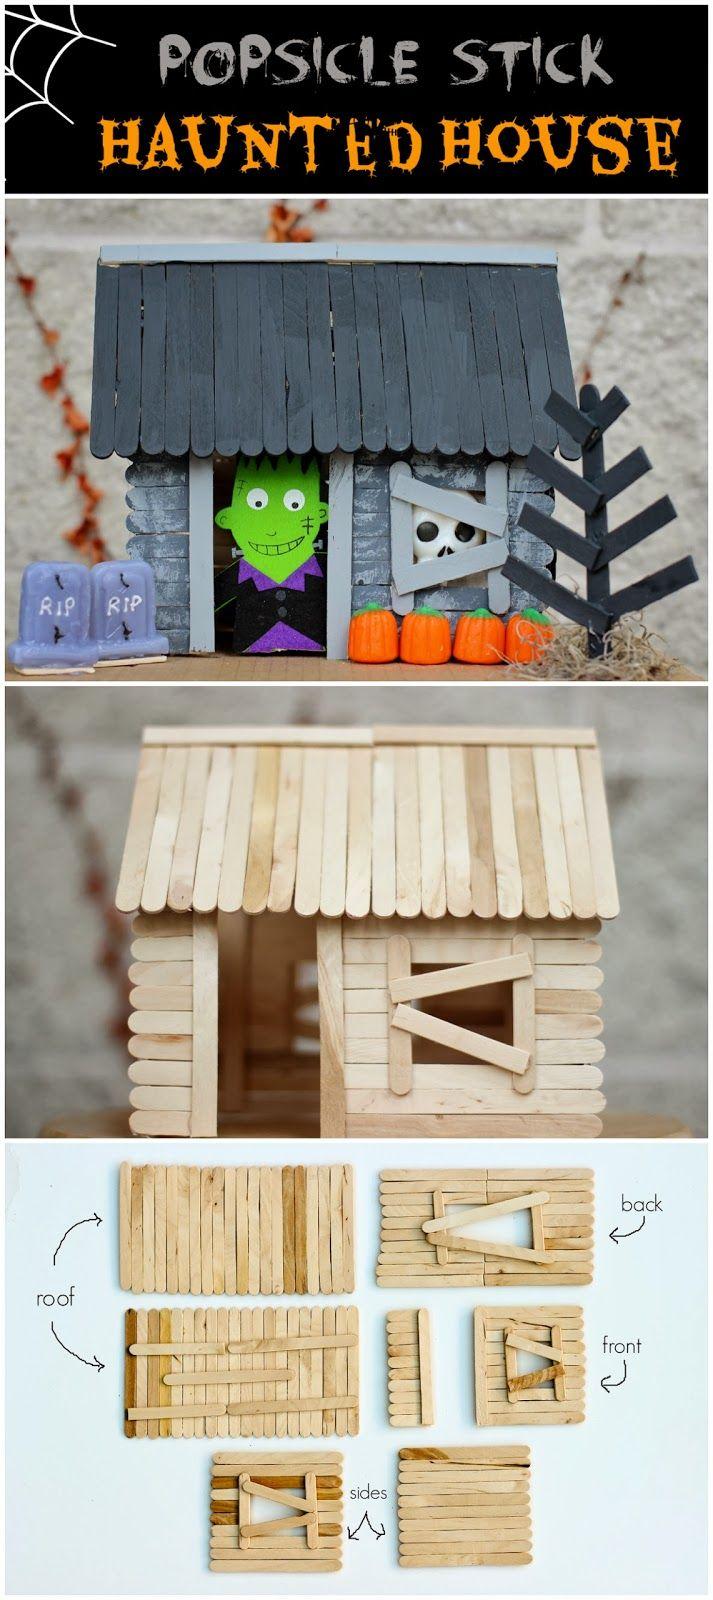 Hochzeit - HAPPILY EVERLY AFTER: Popsicle Stick Haunted House